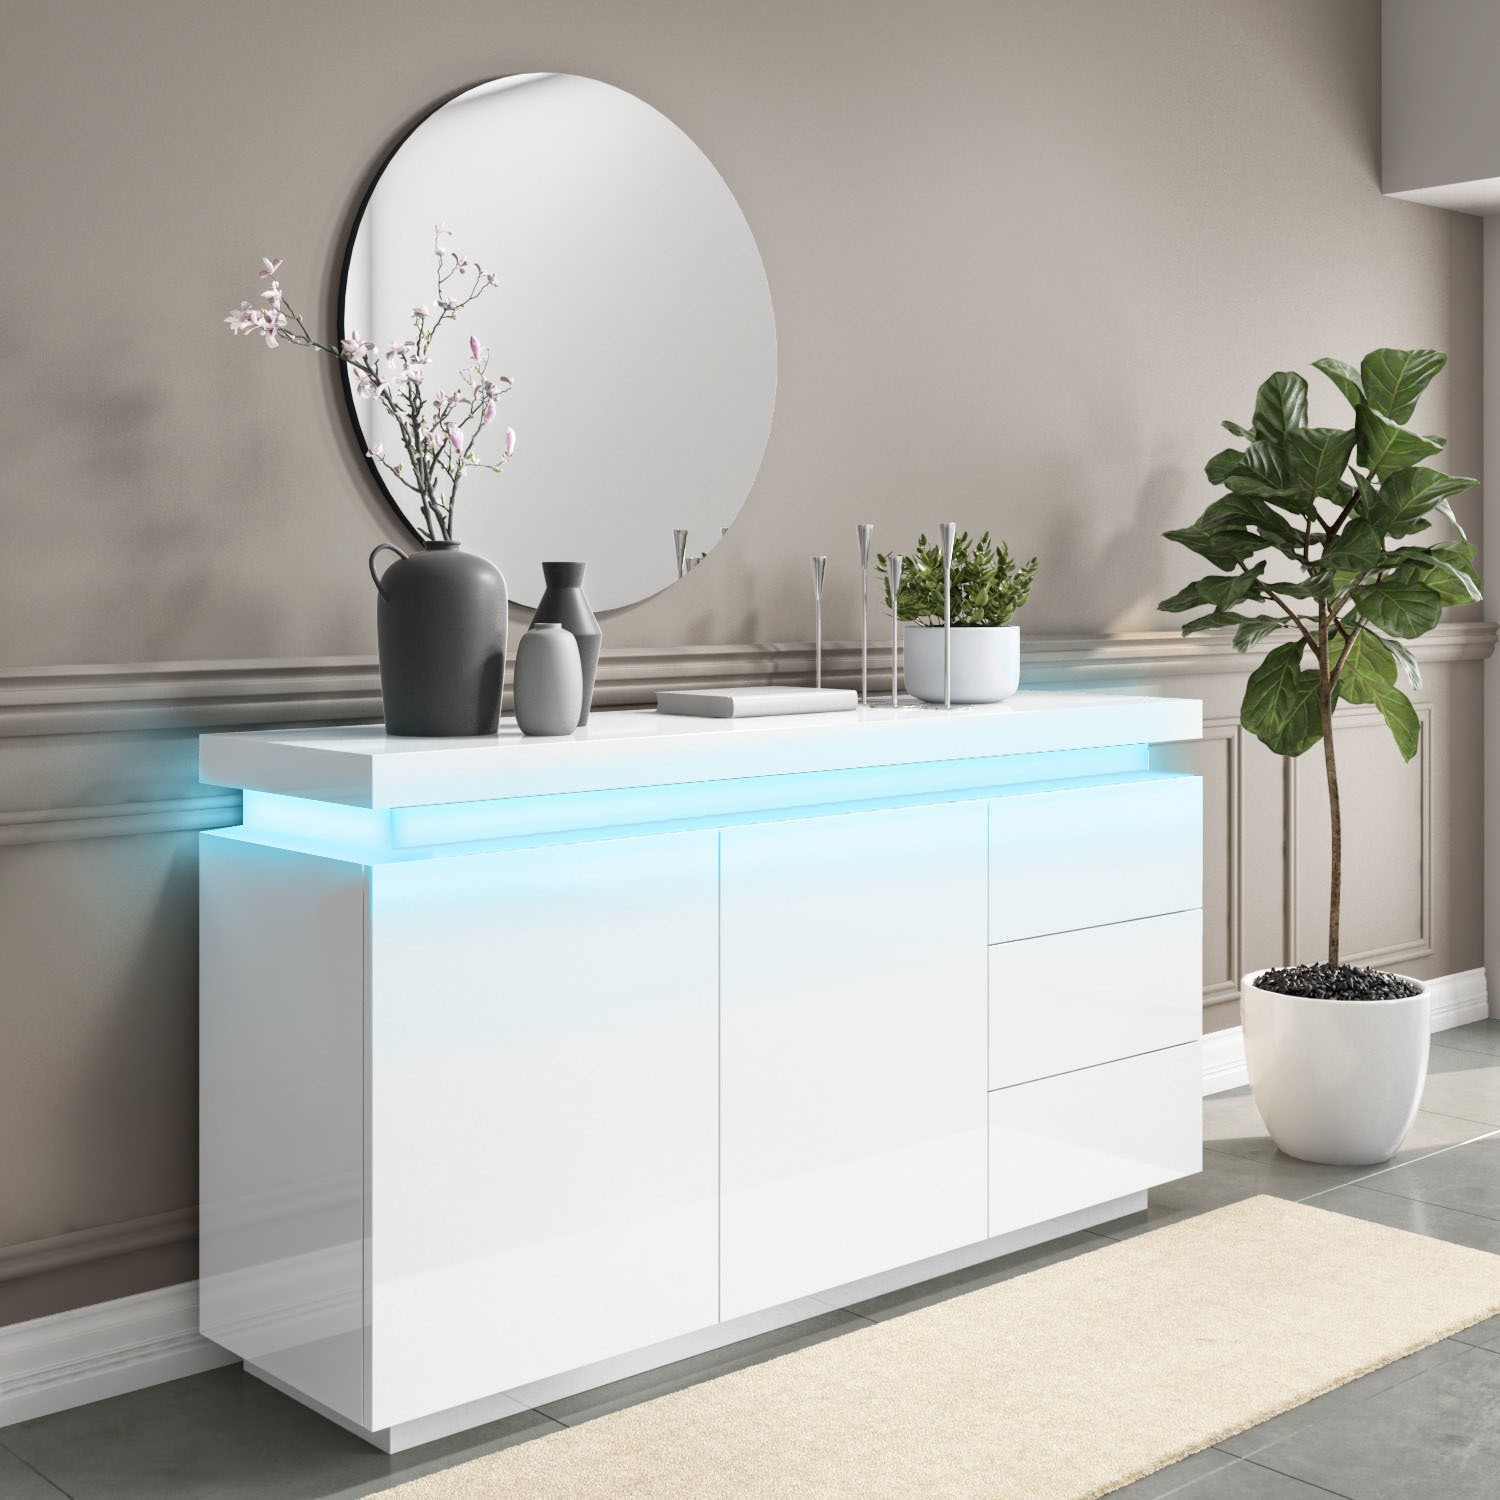 Photo of Large white gloss sideboard with leds - vivienne